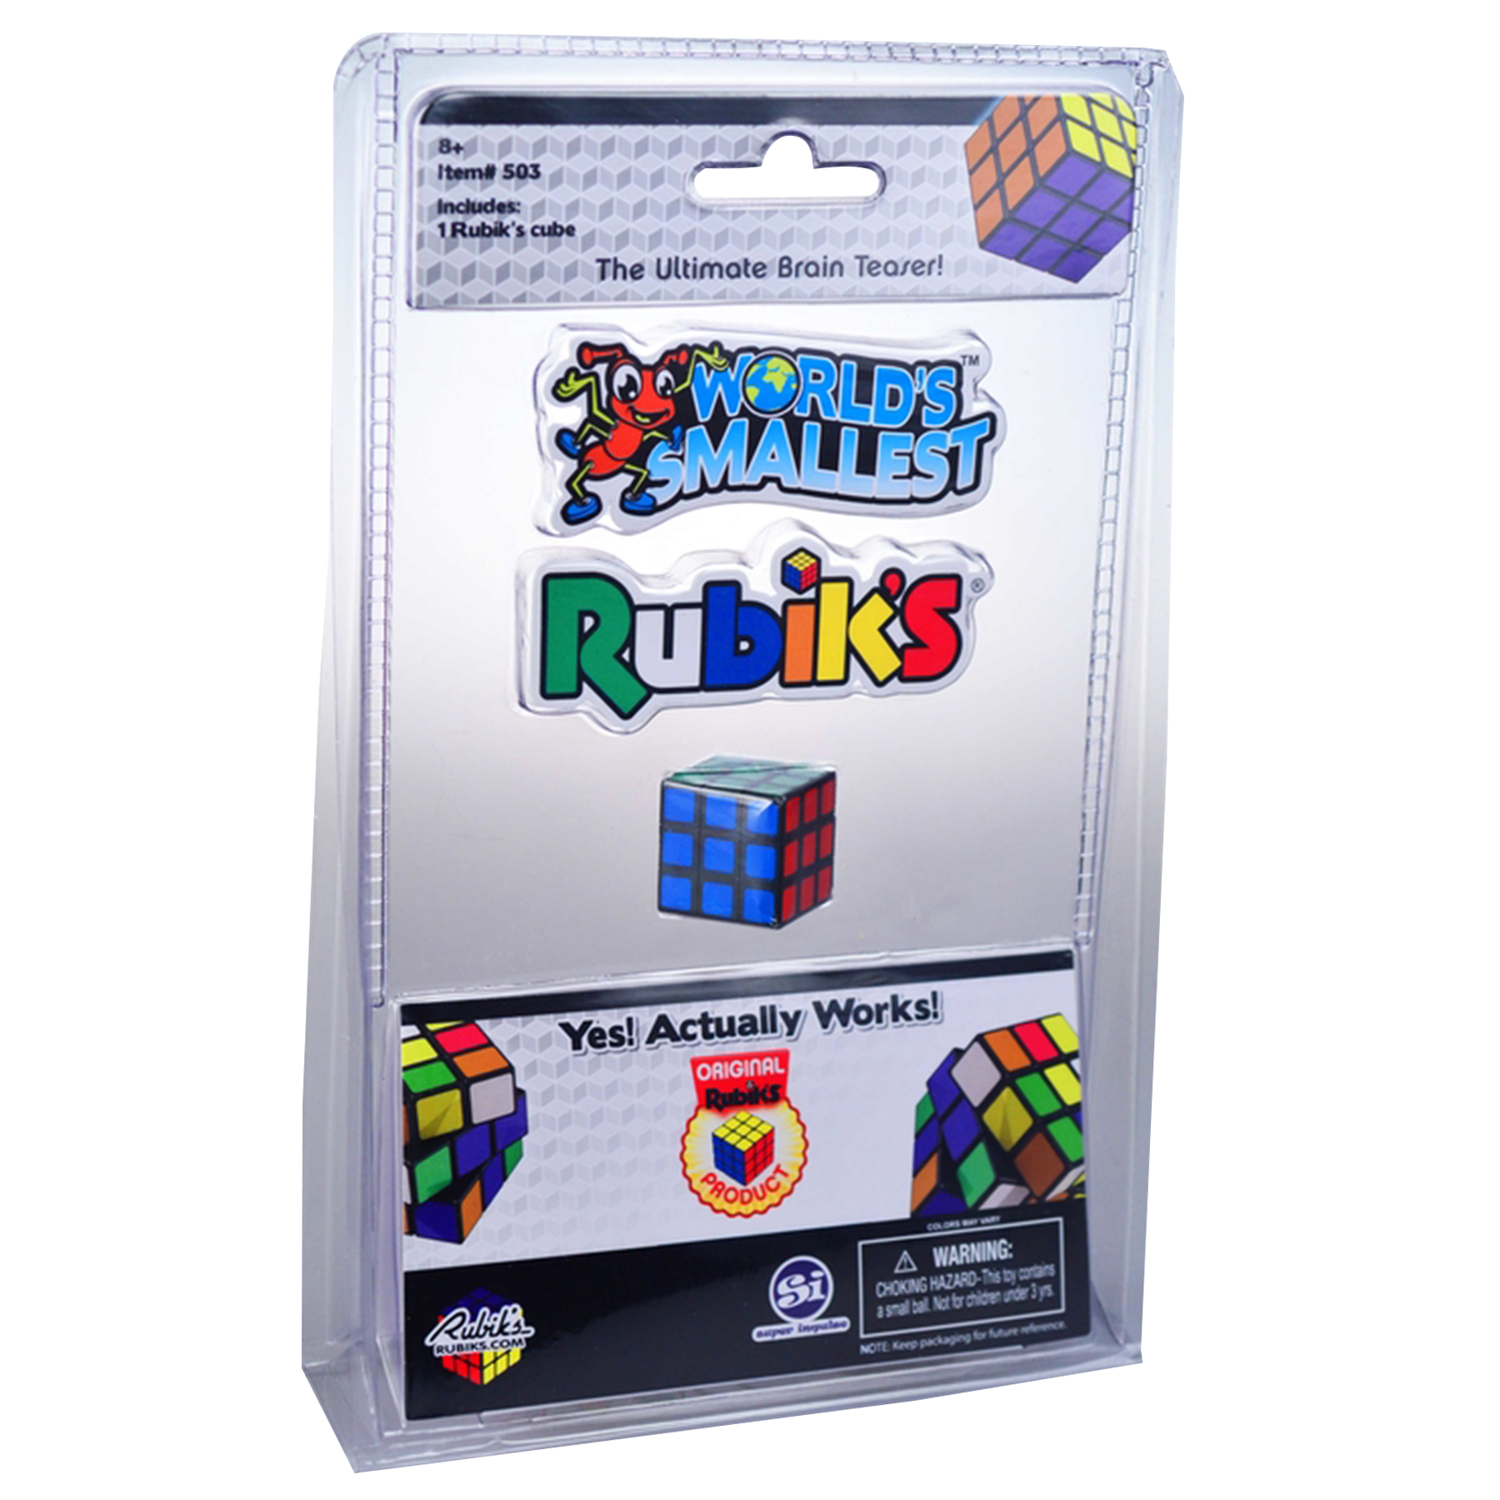 Photos - Other interior and decor Impulse Super  Worlds Smallest Rubiks Cube Plastic Multicolored 503 